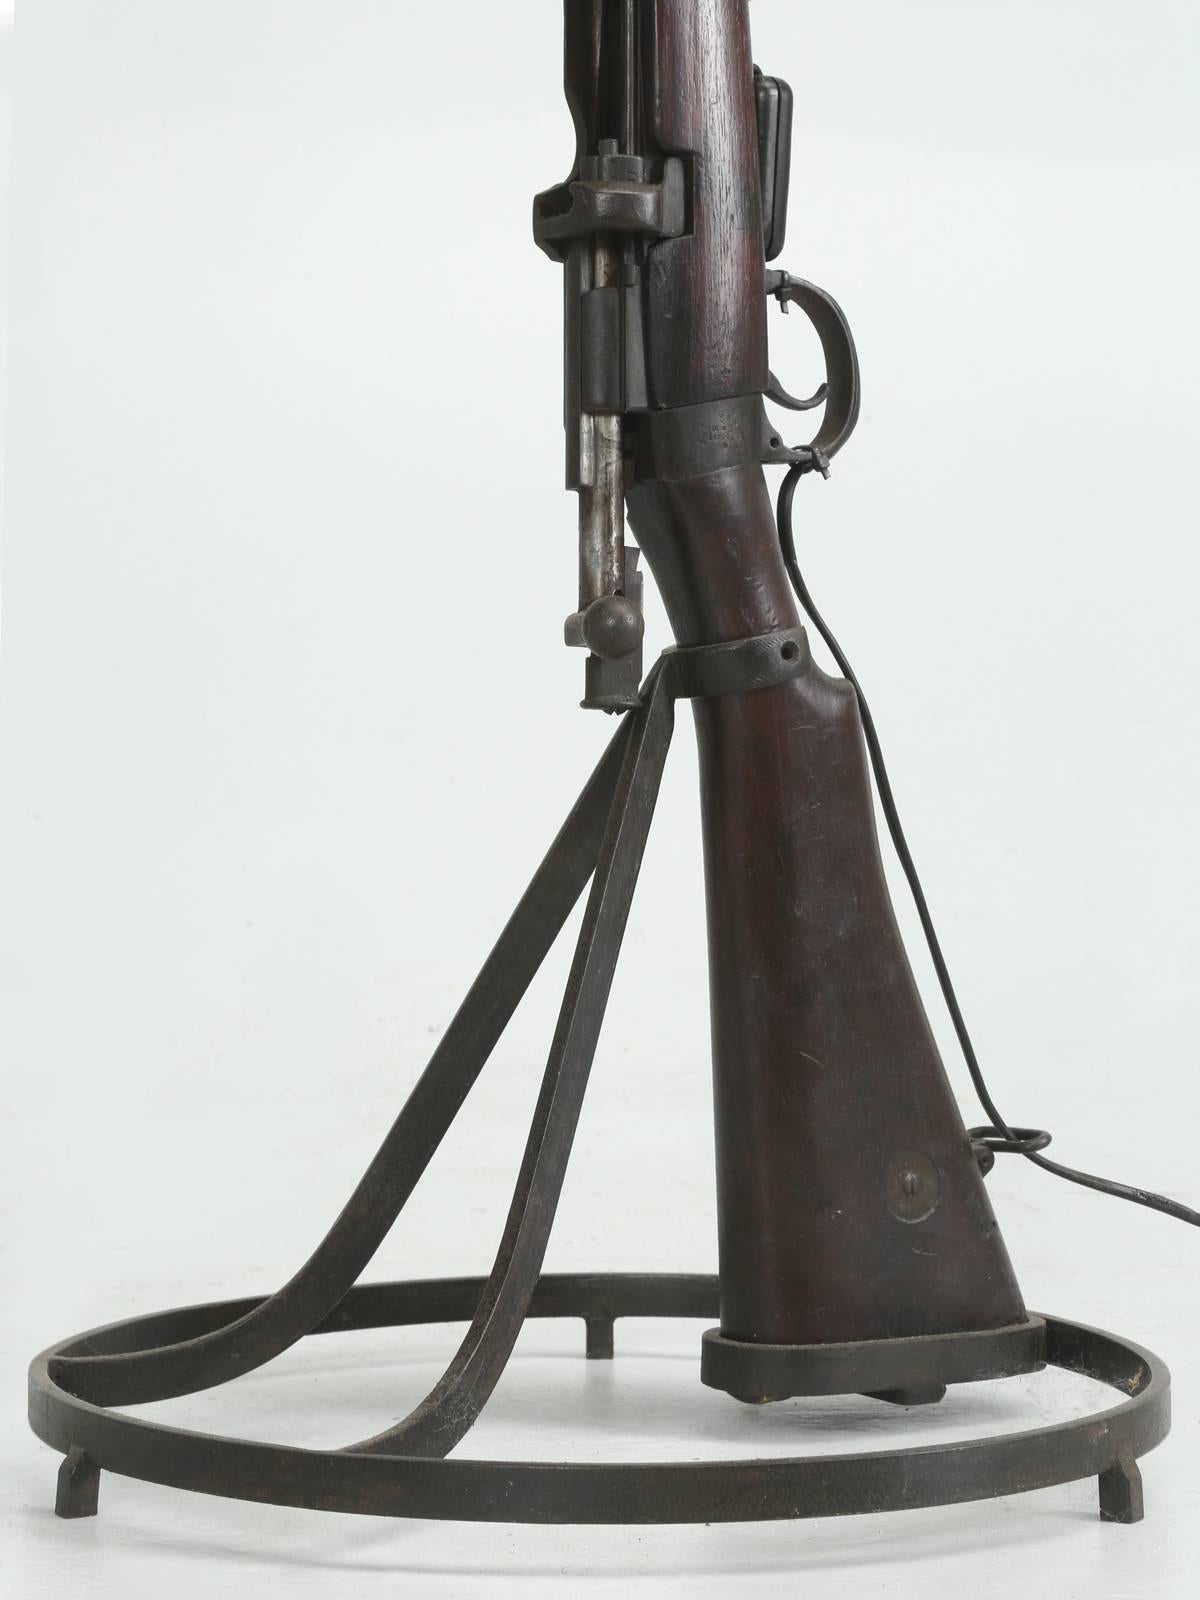 Hand-Crafted Antique English Floor Lamp from a Lee-Enfield Rifle Made by BSA, circa 1918